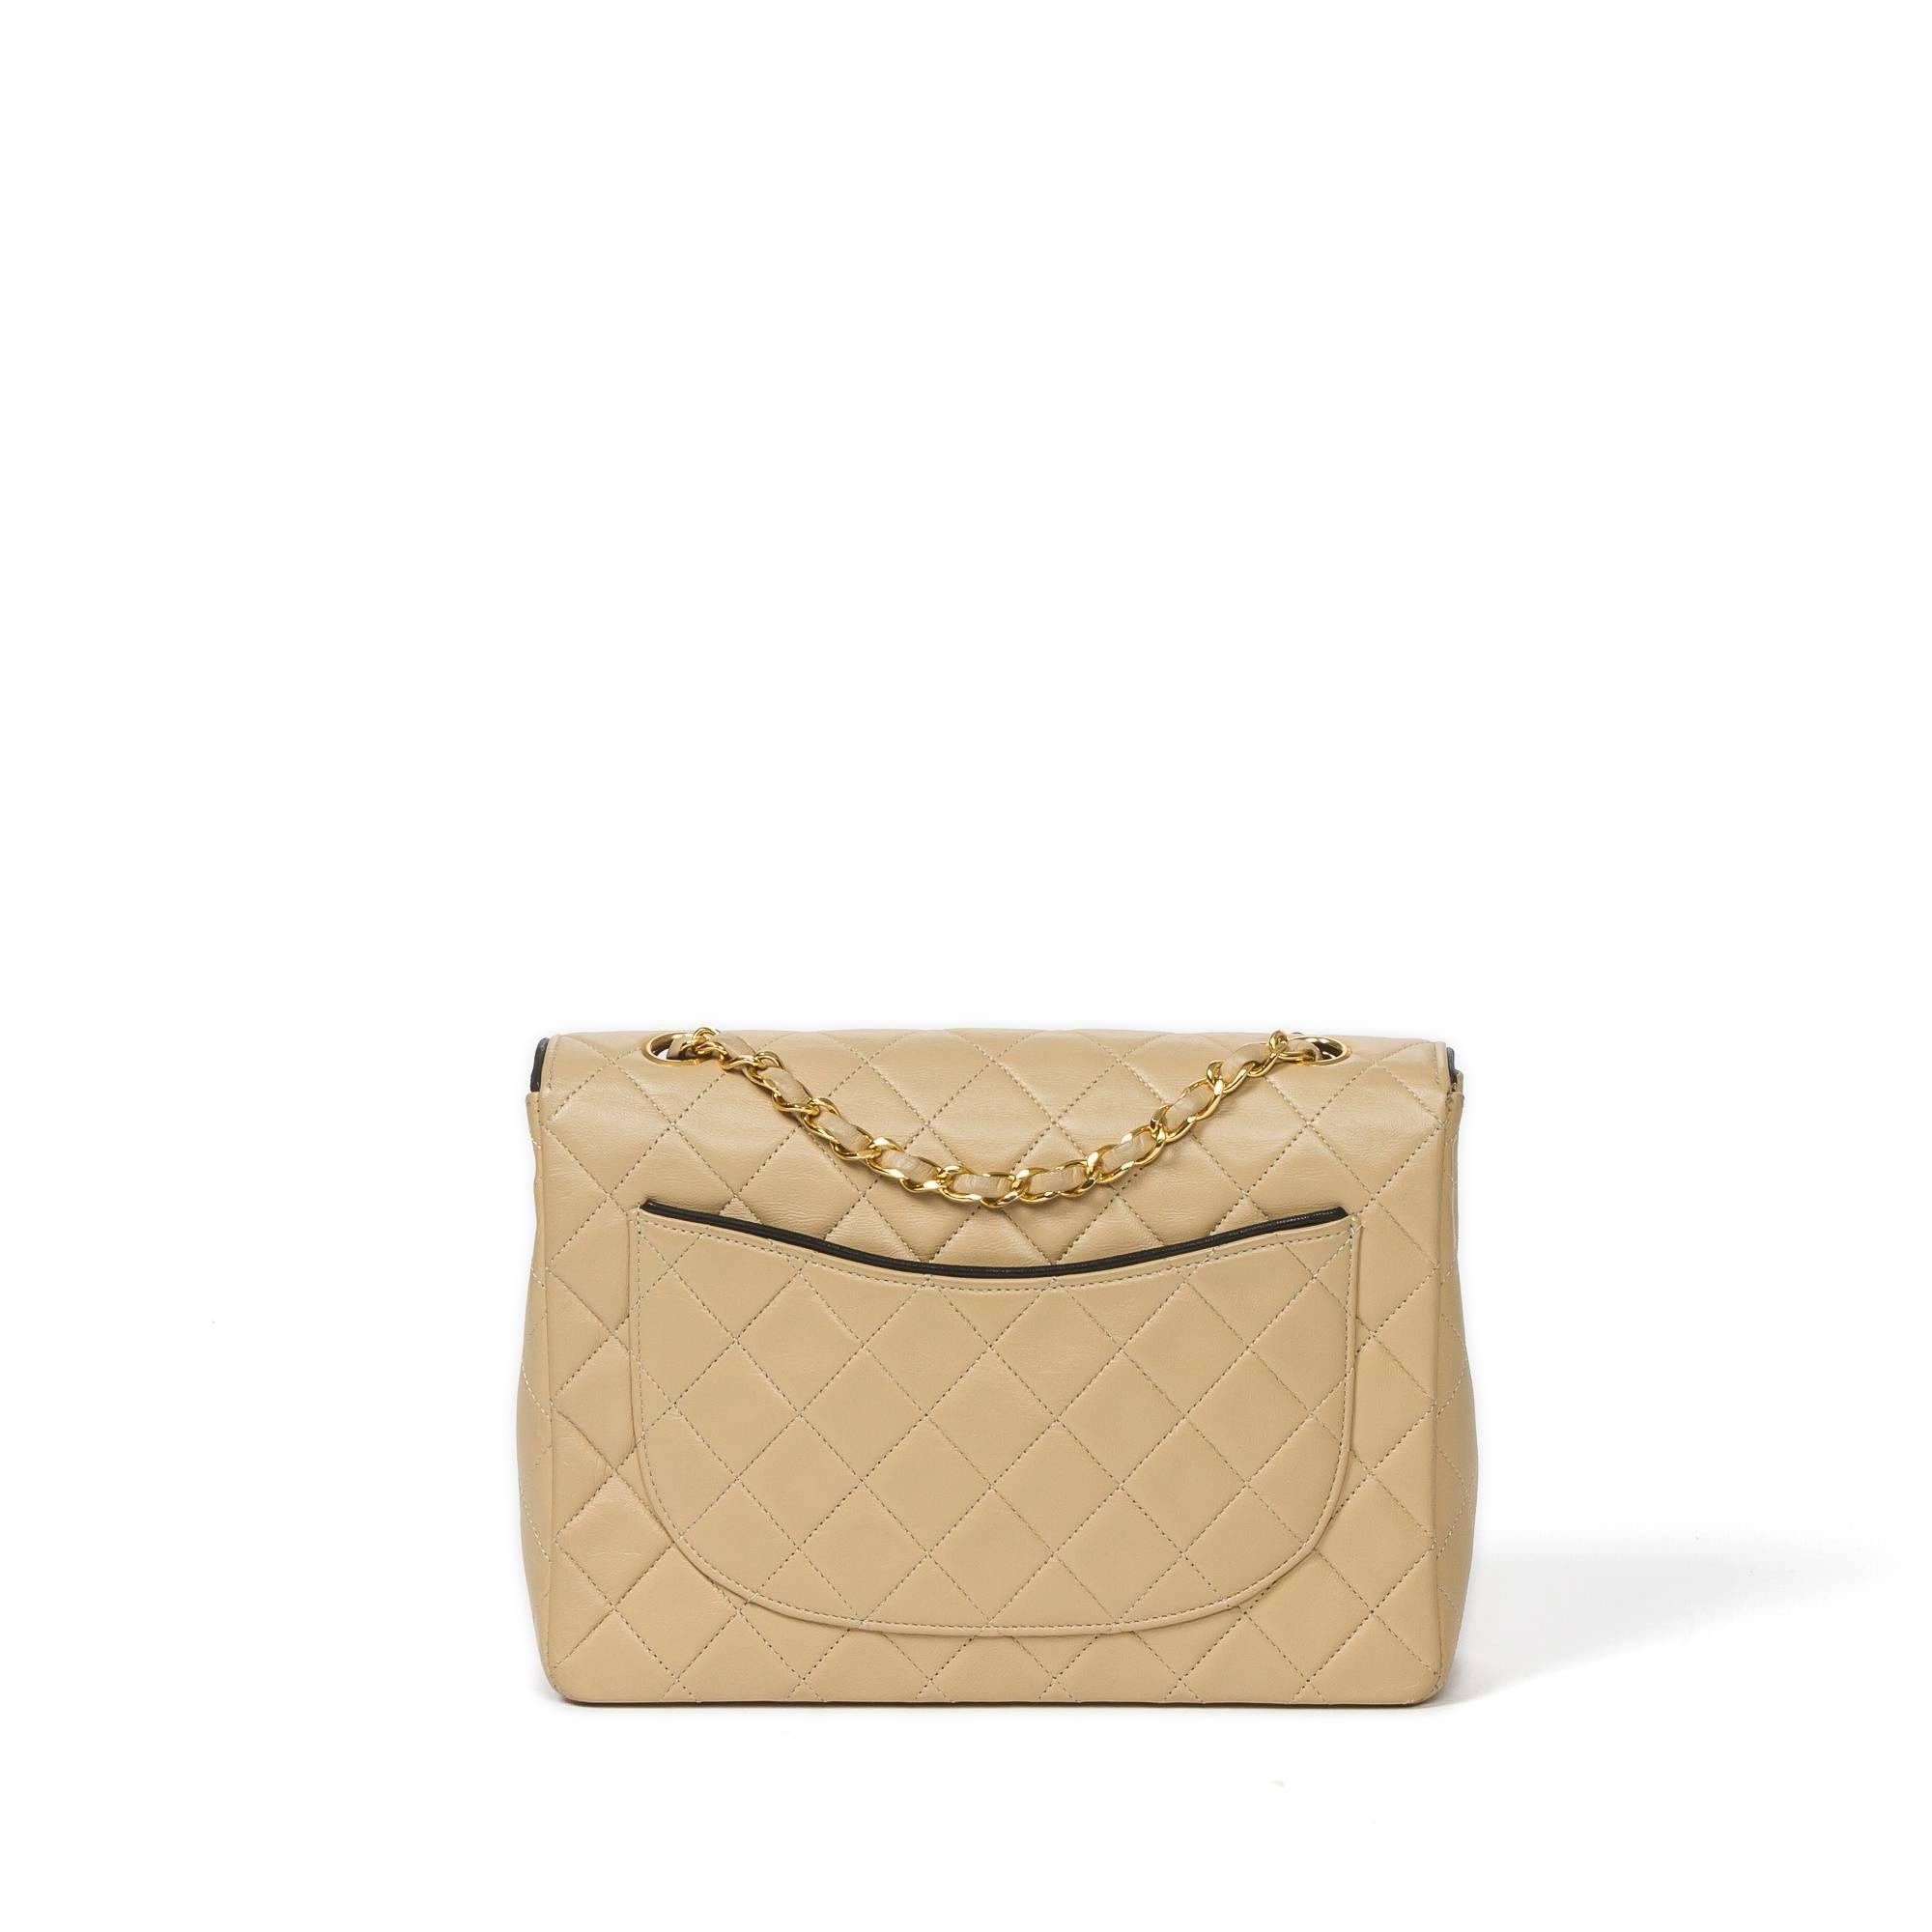 Chanel Vintage 24cm Single Flap Beige Quilted Leather 1